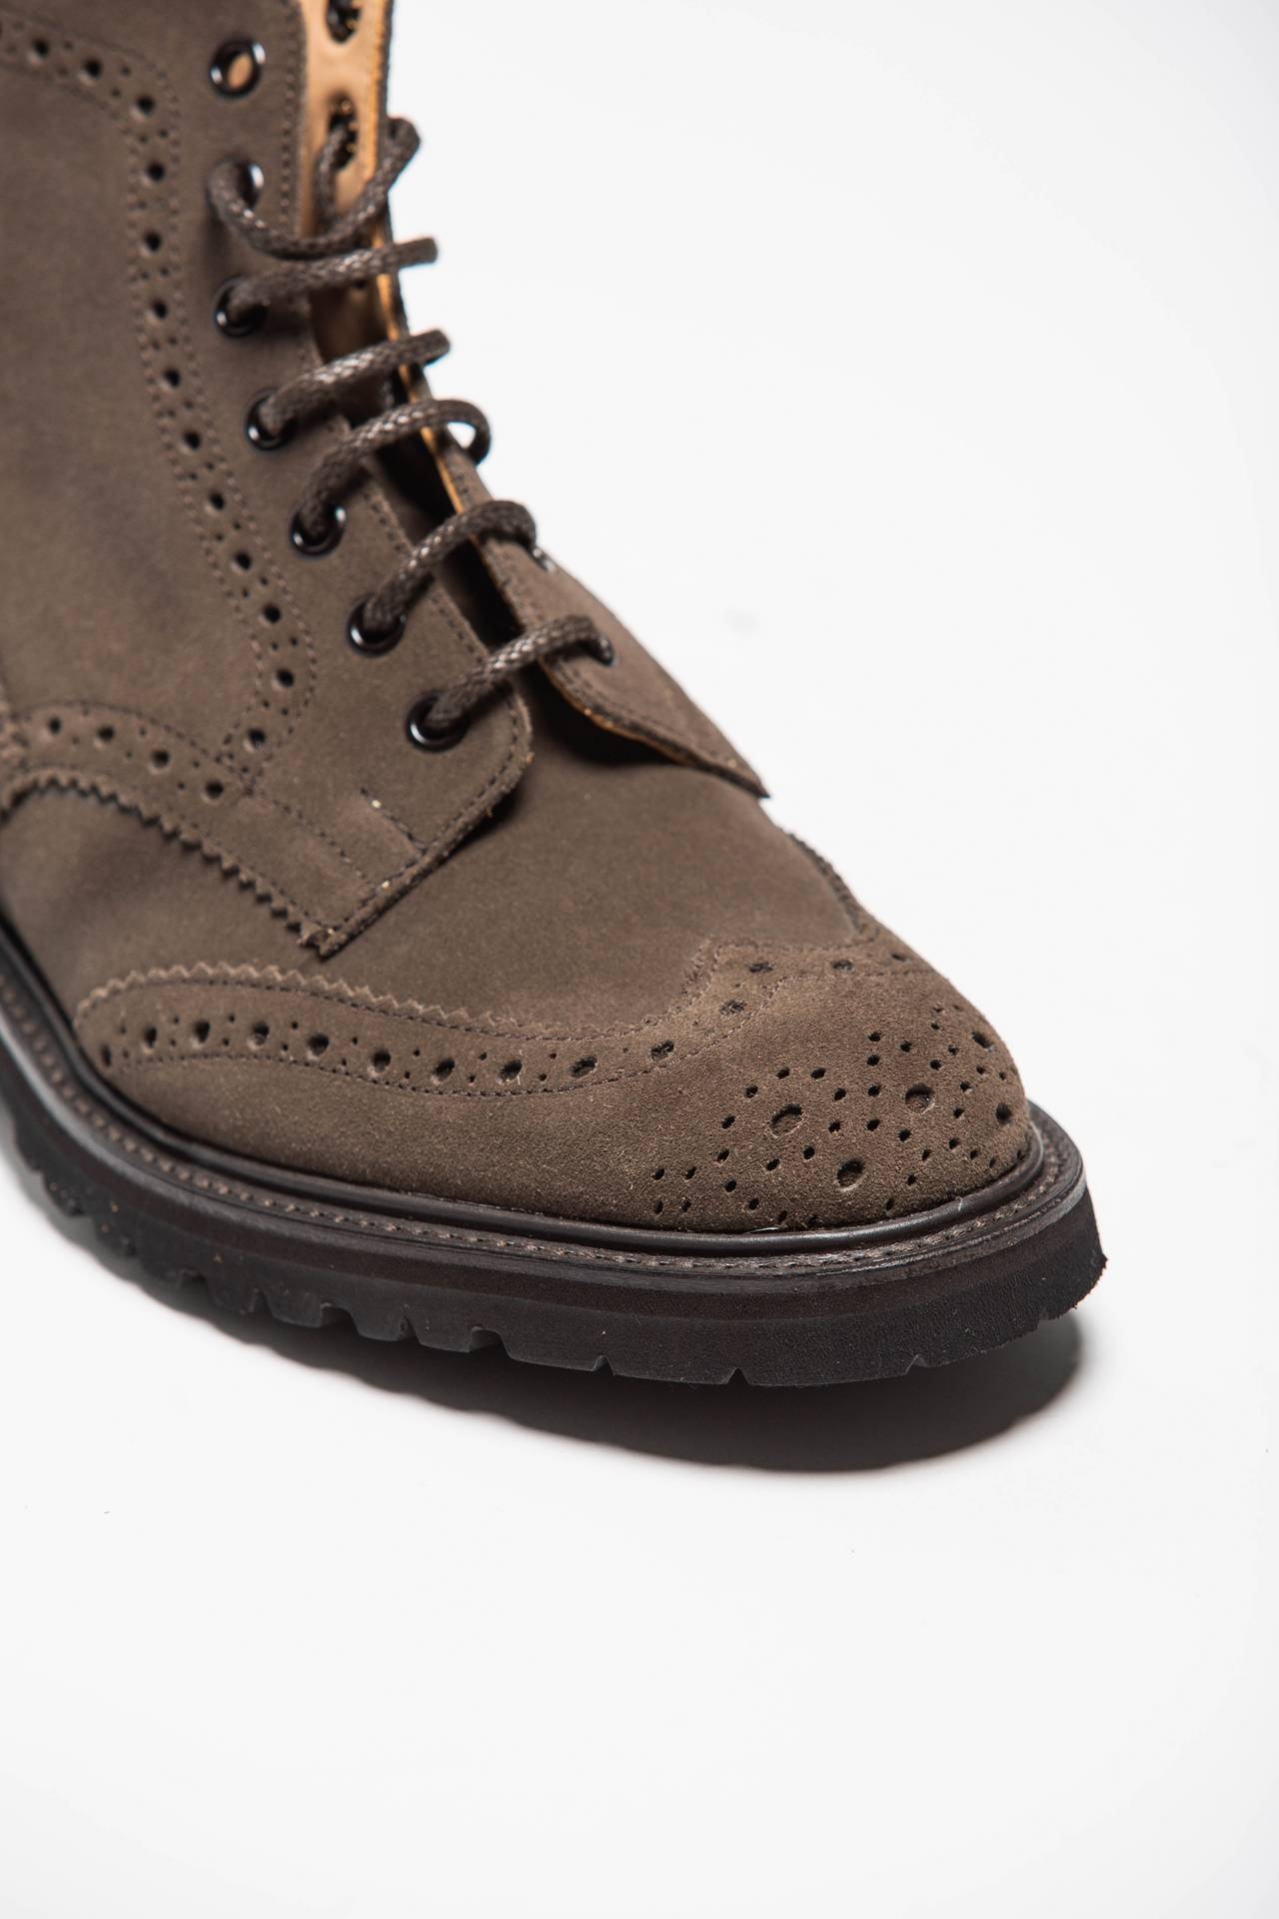 5634-100 STOW leather boots